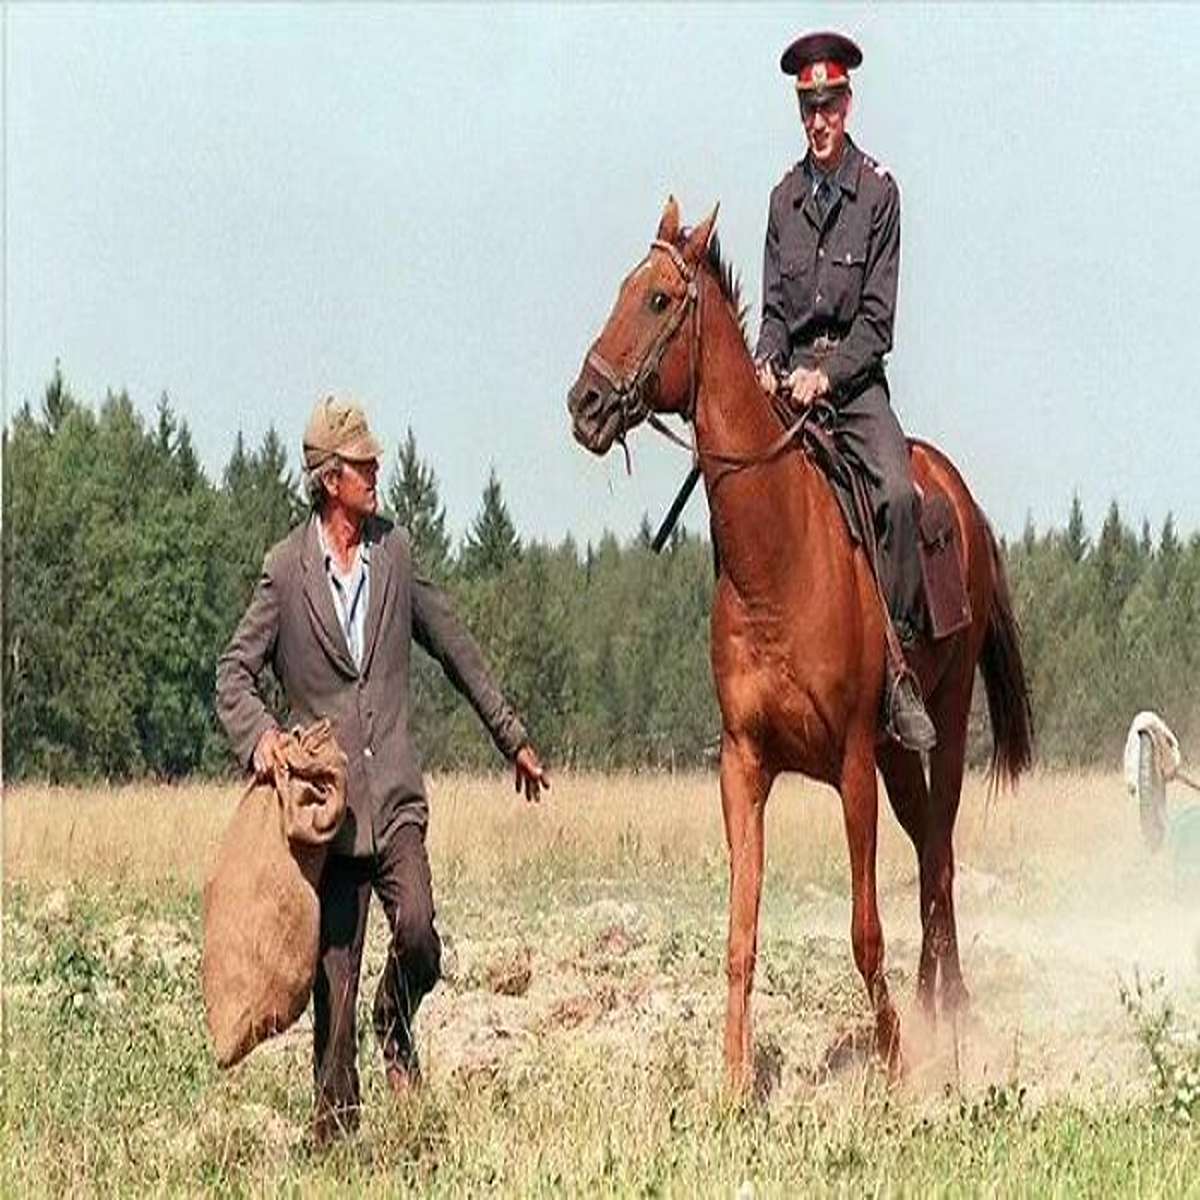 A Militiaman On Horseback Chases A Thief Who Stole A Bag Of Potatoes In A Field Near The City Of Naro-Fominsk, 90 Kilometers Southwest Of Moscow, Russia, On August 27, 1995